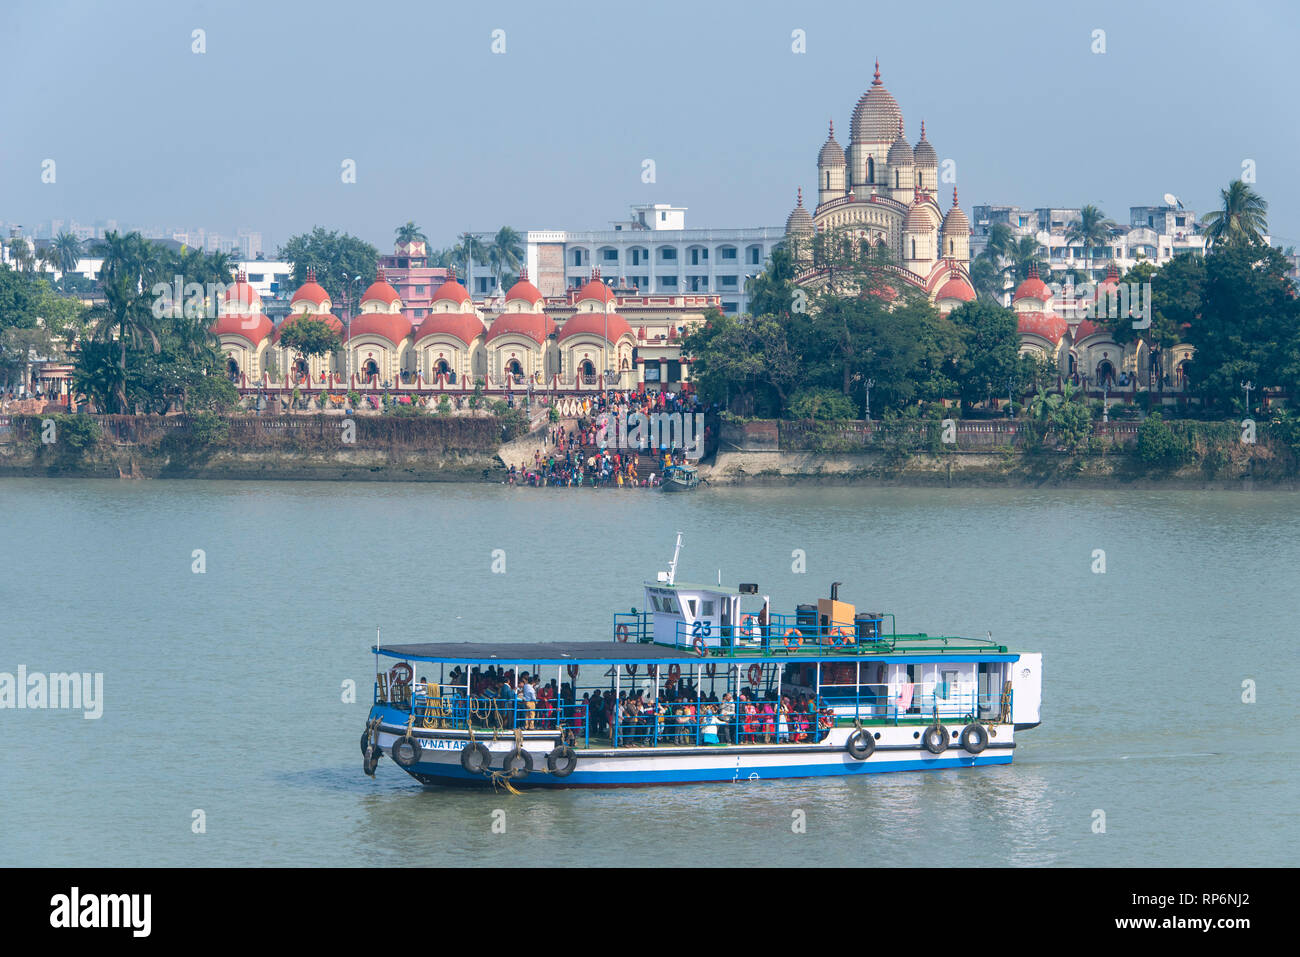 The Dakshineswar Kali Temple Ghat on the banks of the Hooghly River with local people bathing and washing and a boat foreground on a sunny day. Stock Photo